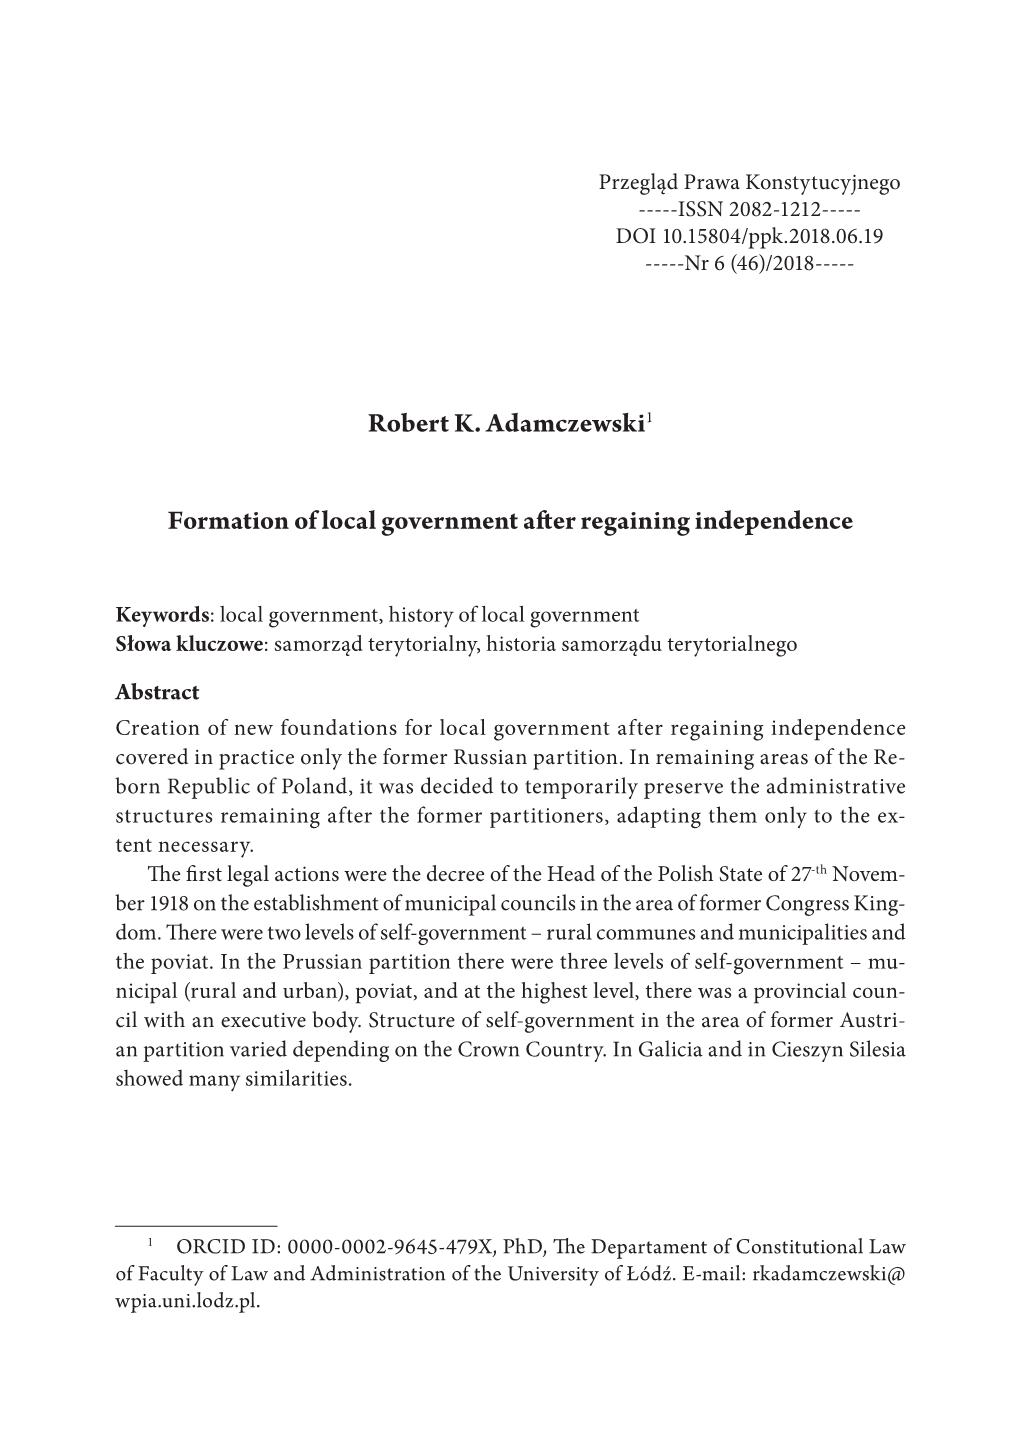 Robert K. Adamczewski1 Formation of Local Government After Regaining